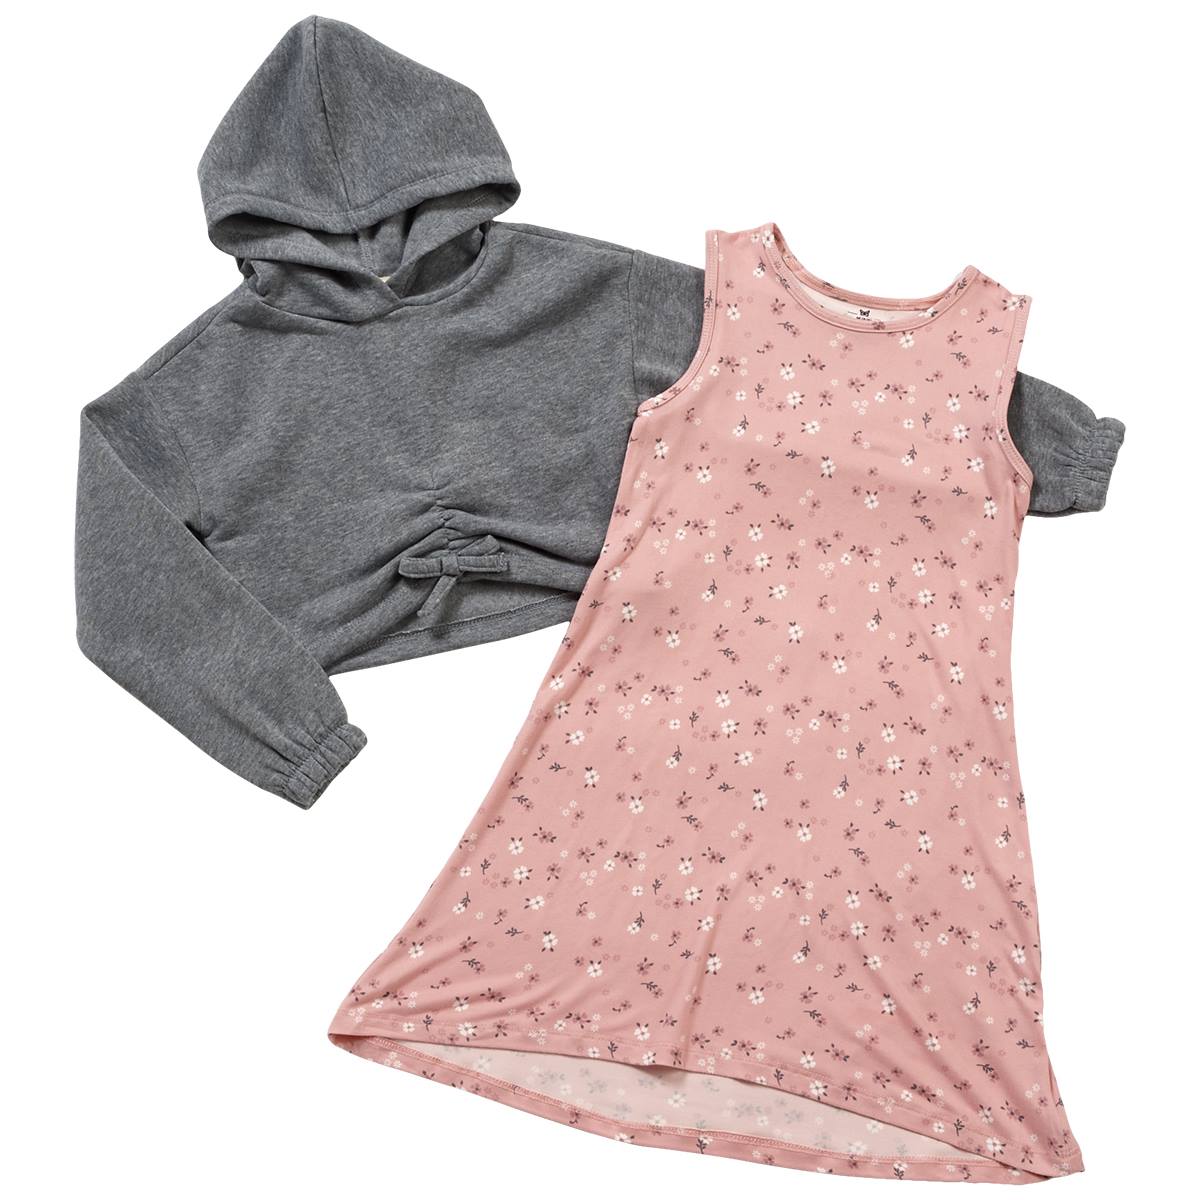 Girls (4-6x) One Step Up 2pc. Fleece Overall Hoodie Floral Dress